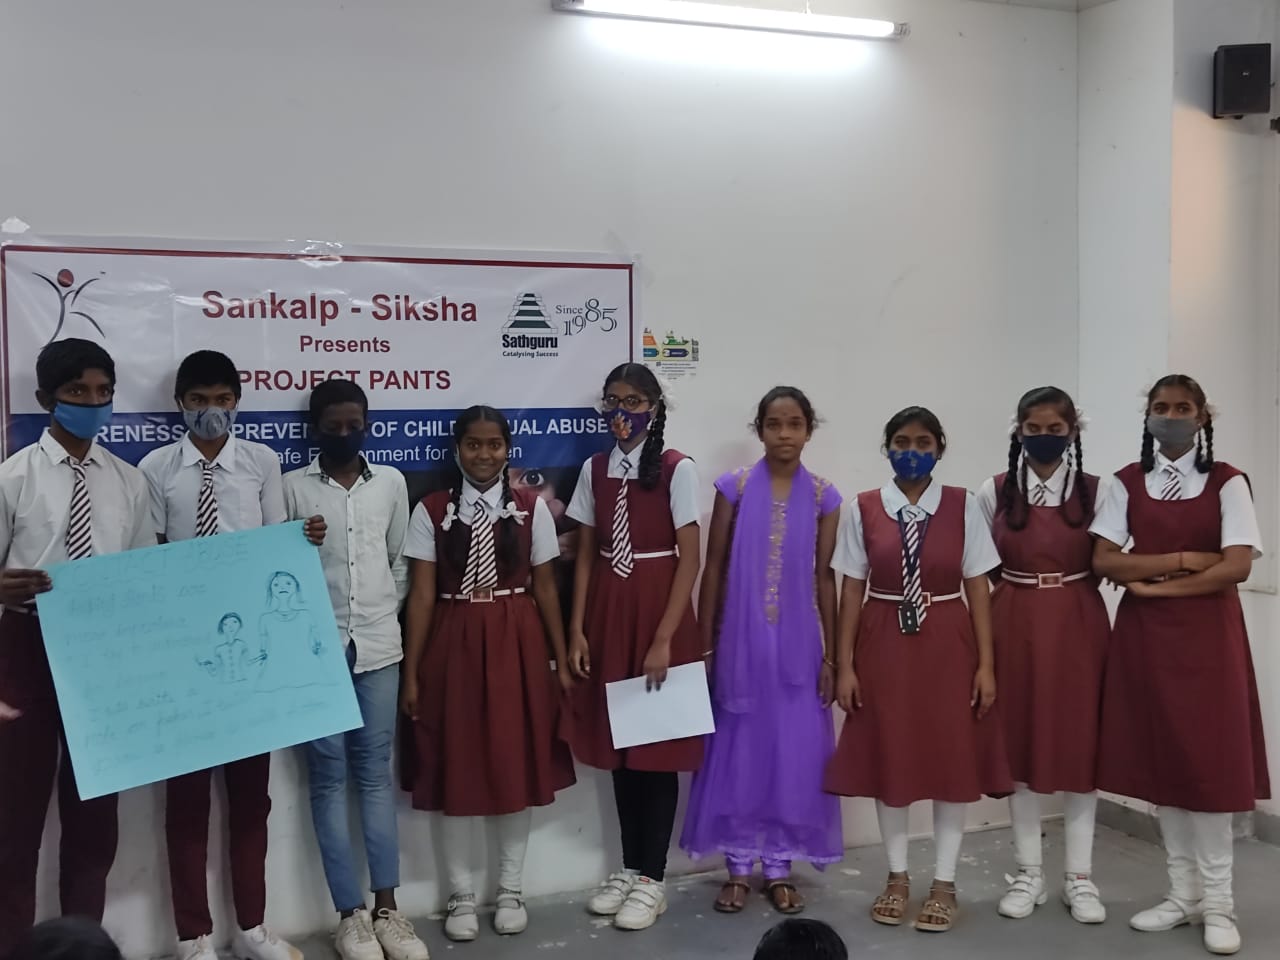 Sankalp-Siksha-Project PANTS-Awareness on prevention of Child Sexual Abuse at Dr. B. R. Ambedkar High School